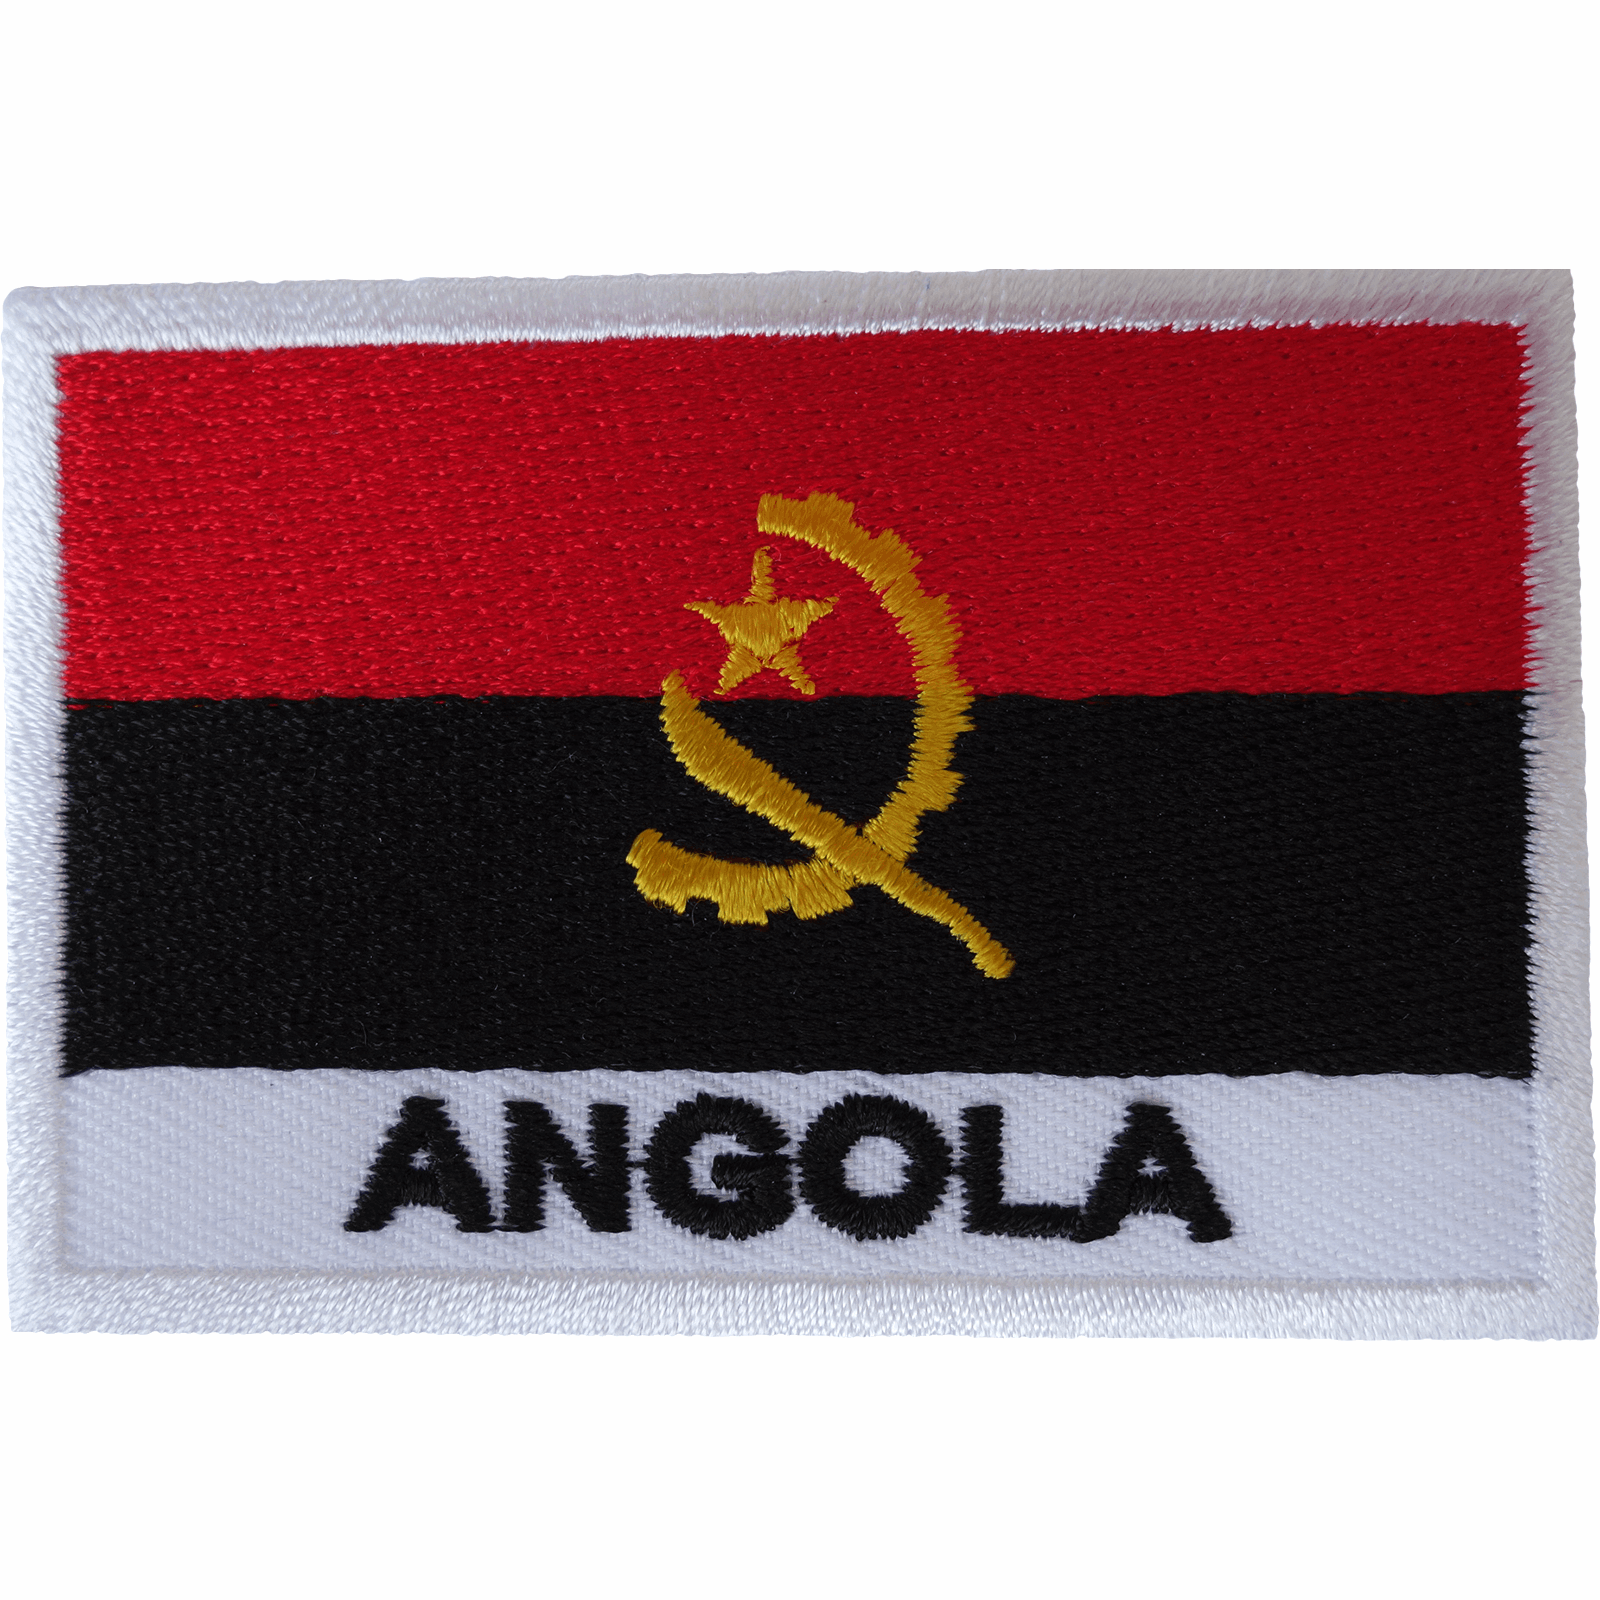 Angola Flag Iron On Patch Sew On Clothes South Africa African Embroidered Badge